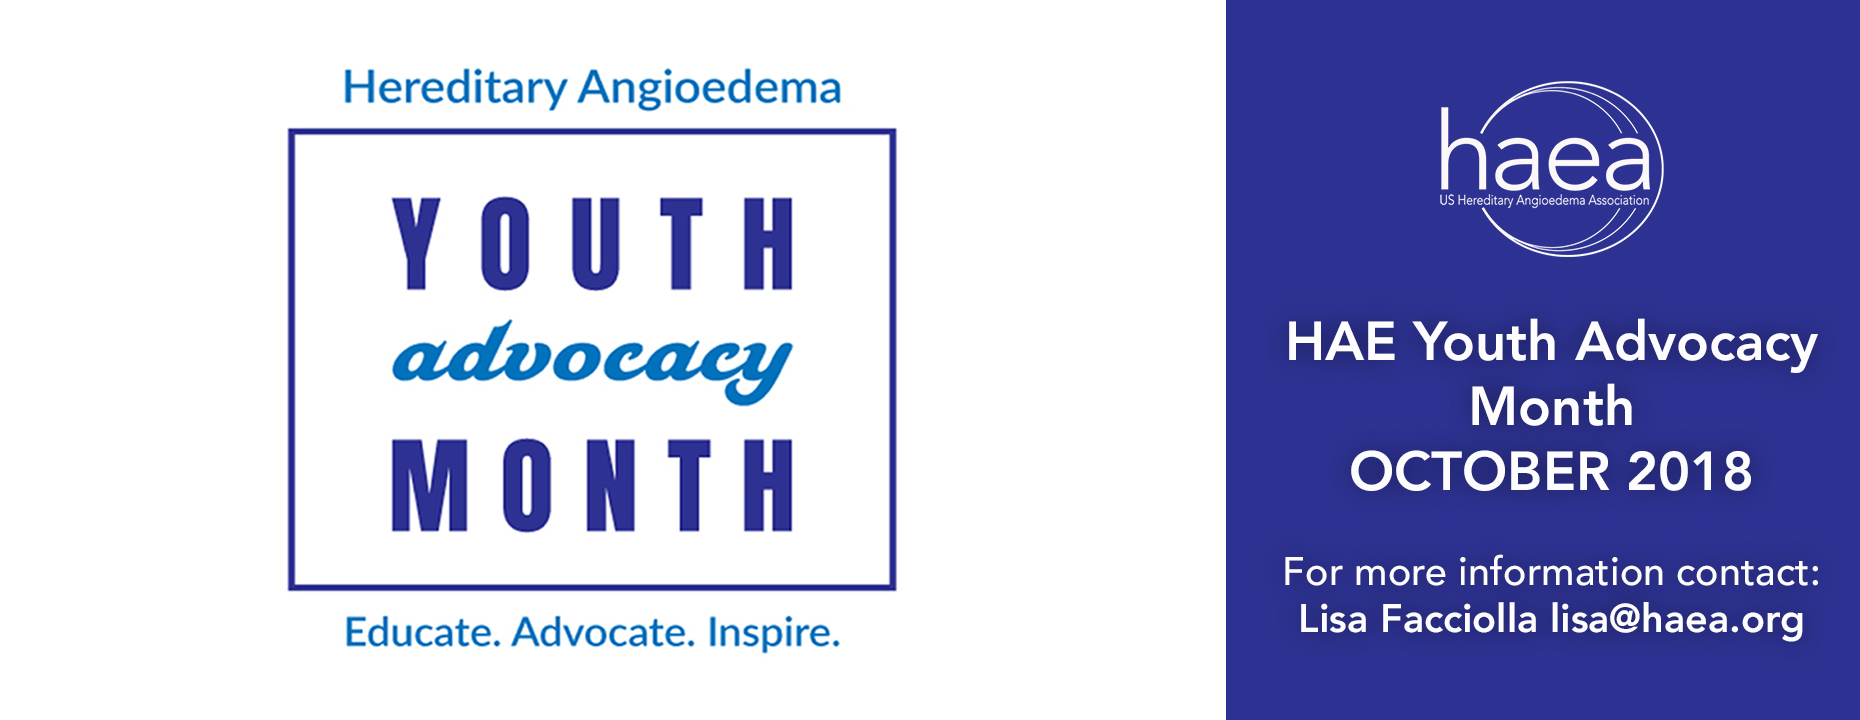 Youth Advocacy Month